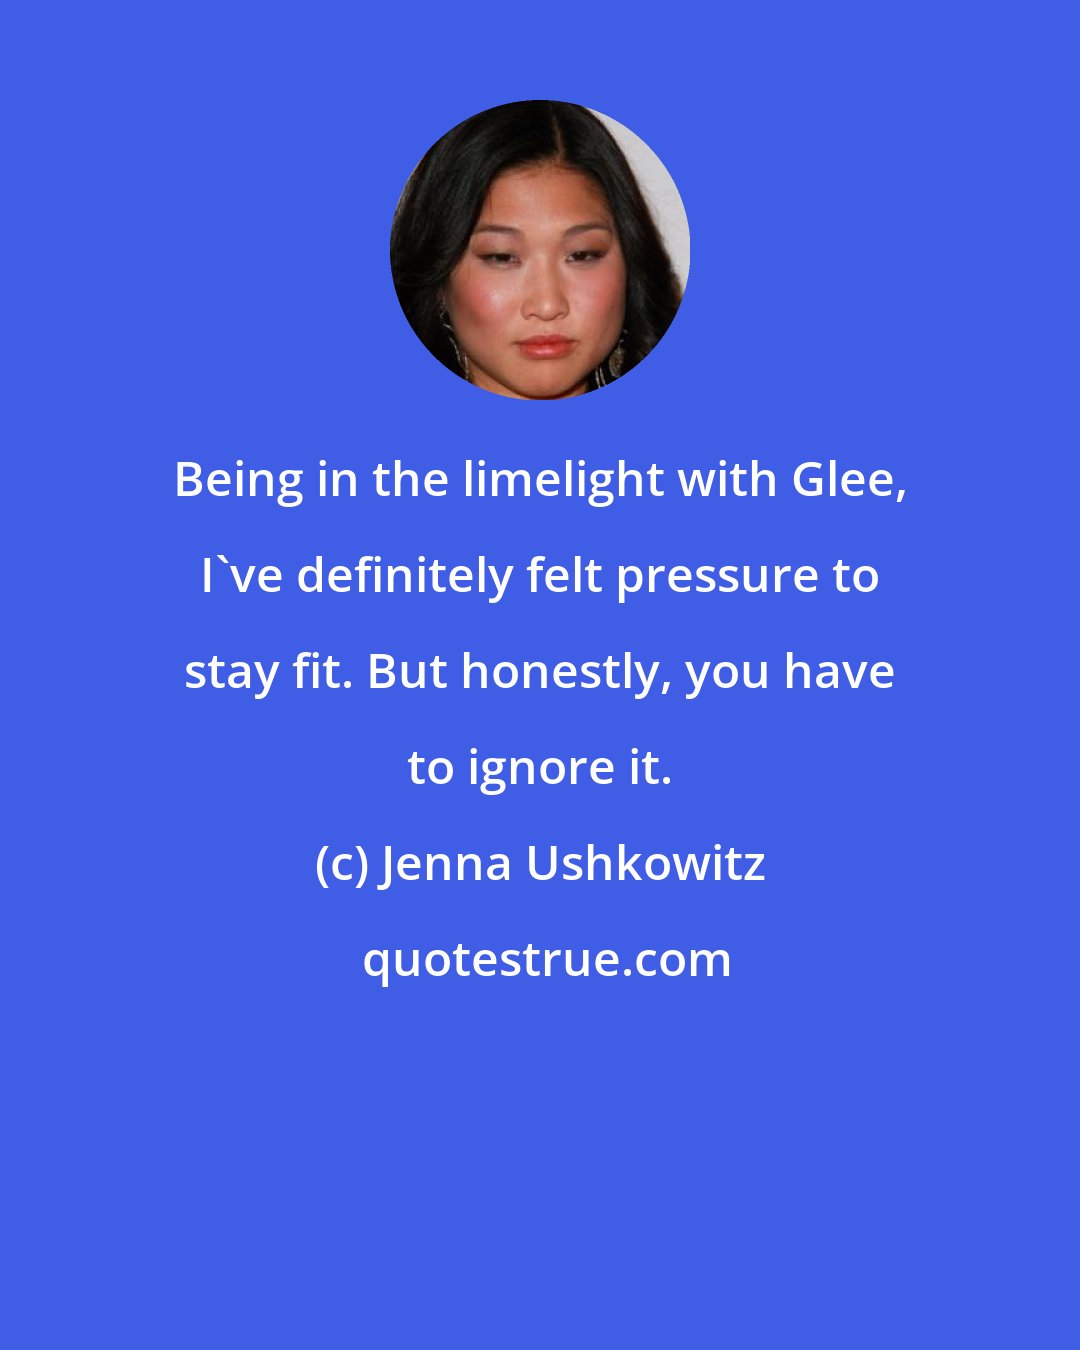 Jenna Ushkowitz: Being in the limelight with Glee, I've definitely felt pressure to stay fit. But honestly, you have to ignore it.